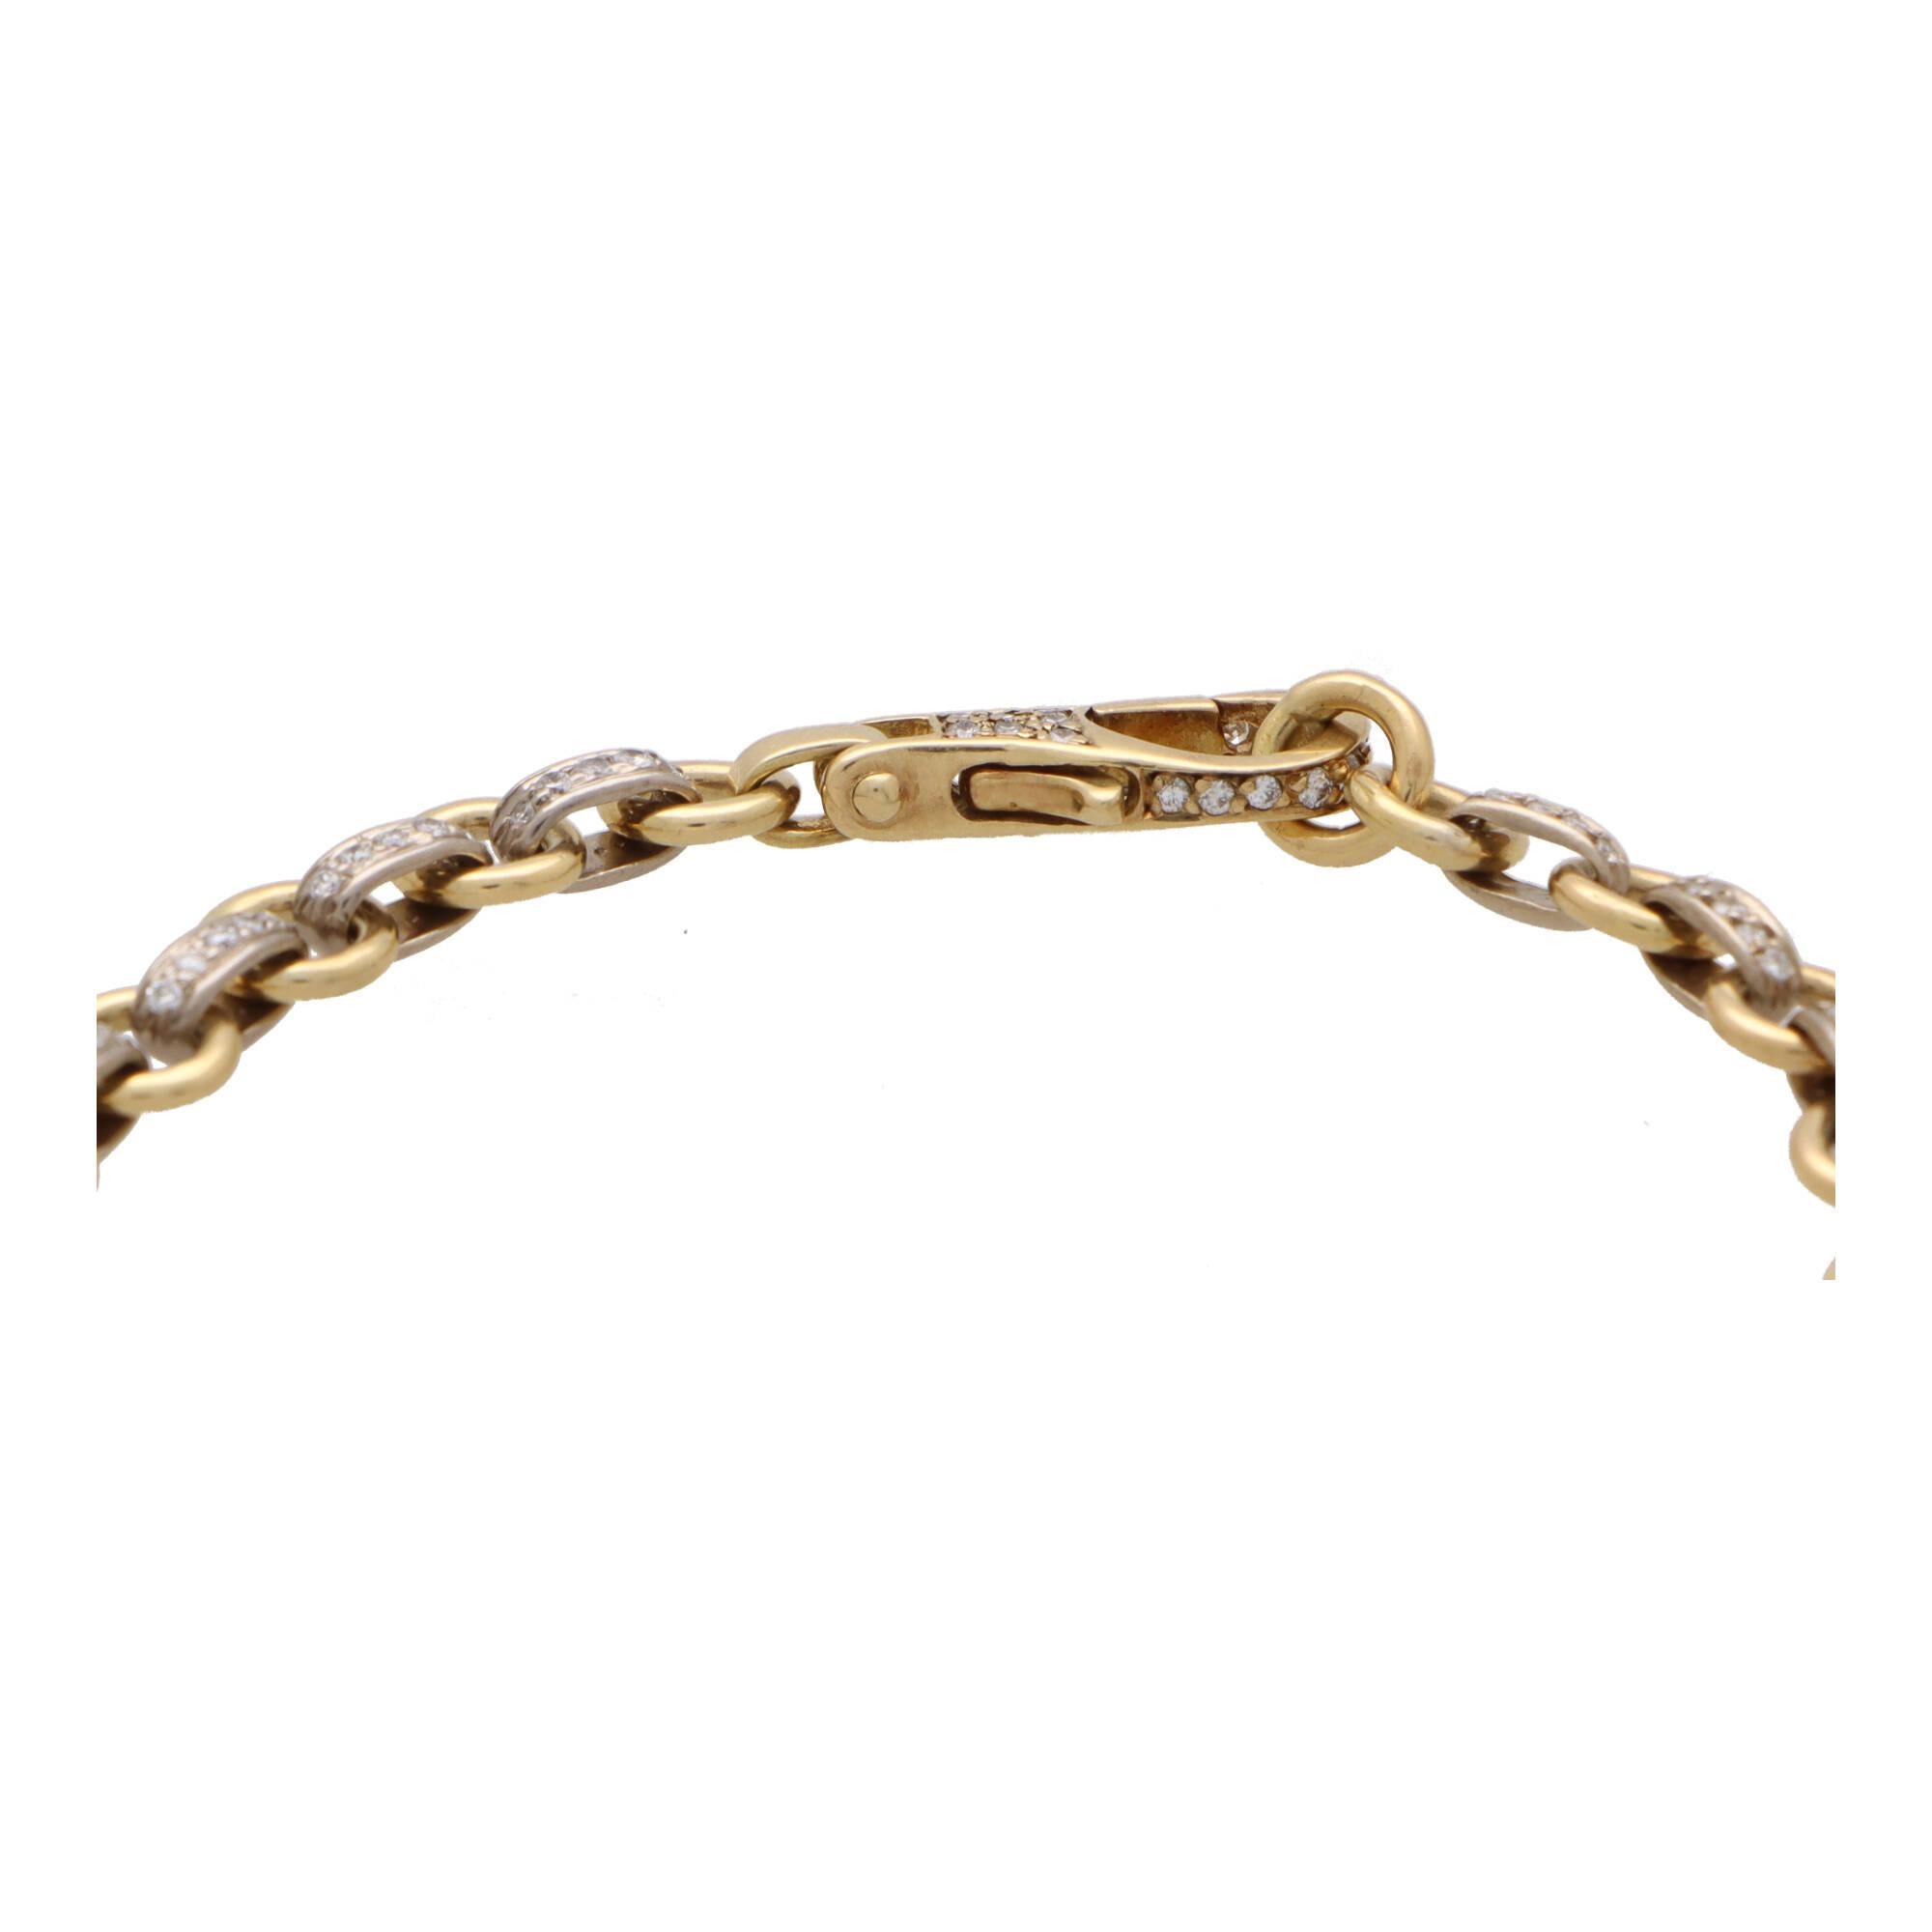  A simple yet elegant diamond chain link bracelet set in 18k yellow gold.

The bracelet is composed of 25 circular yellow gold links connected together via diamond set whit gold oval links. The diamonds are subtle yet elegant and make the bracelet a